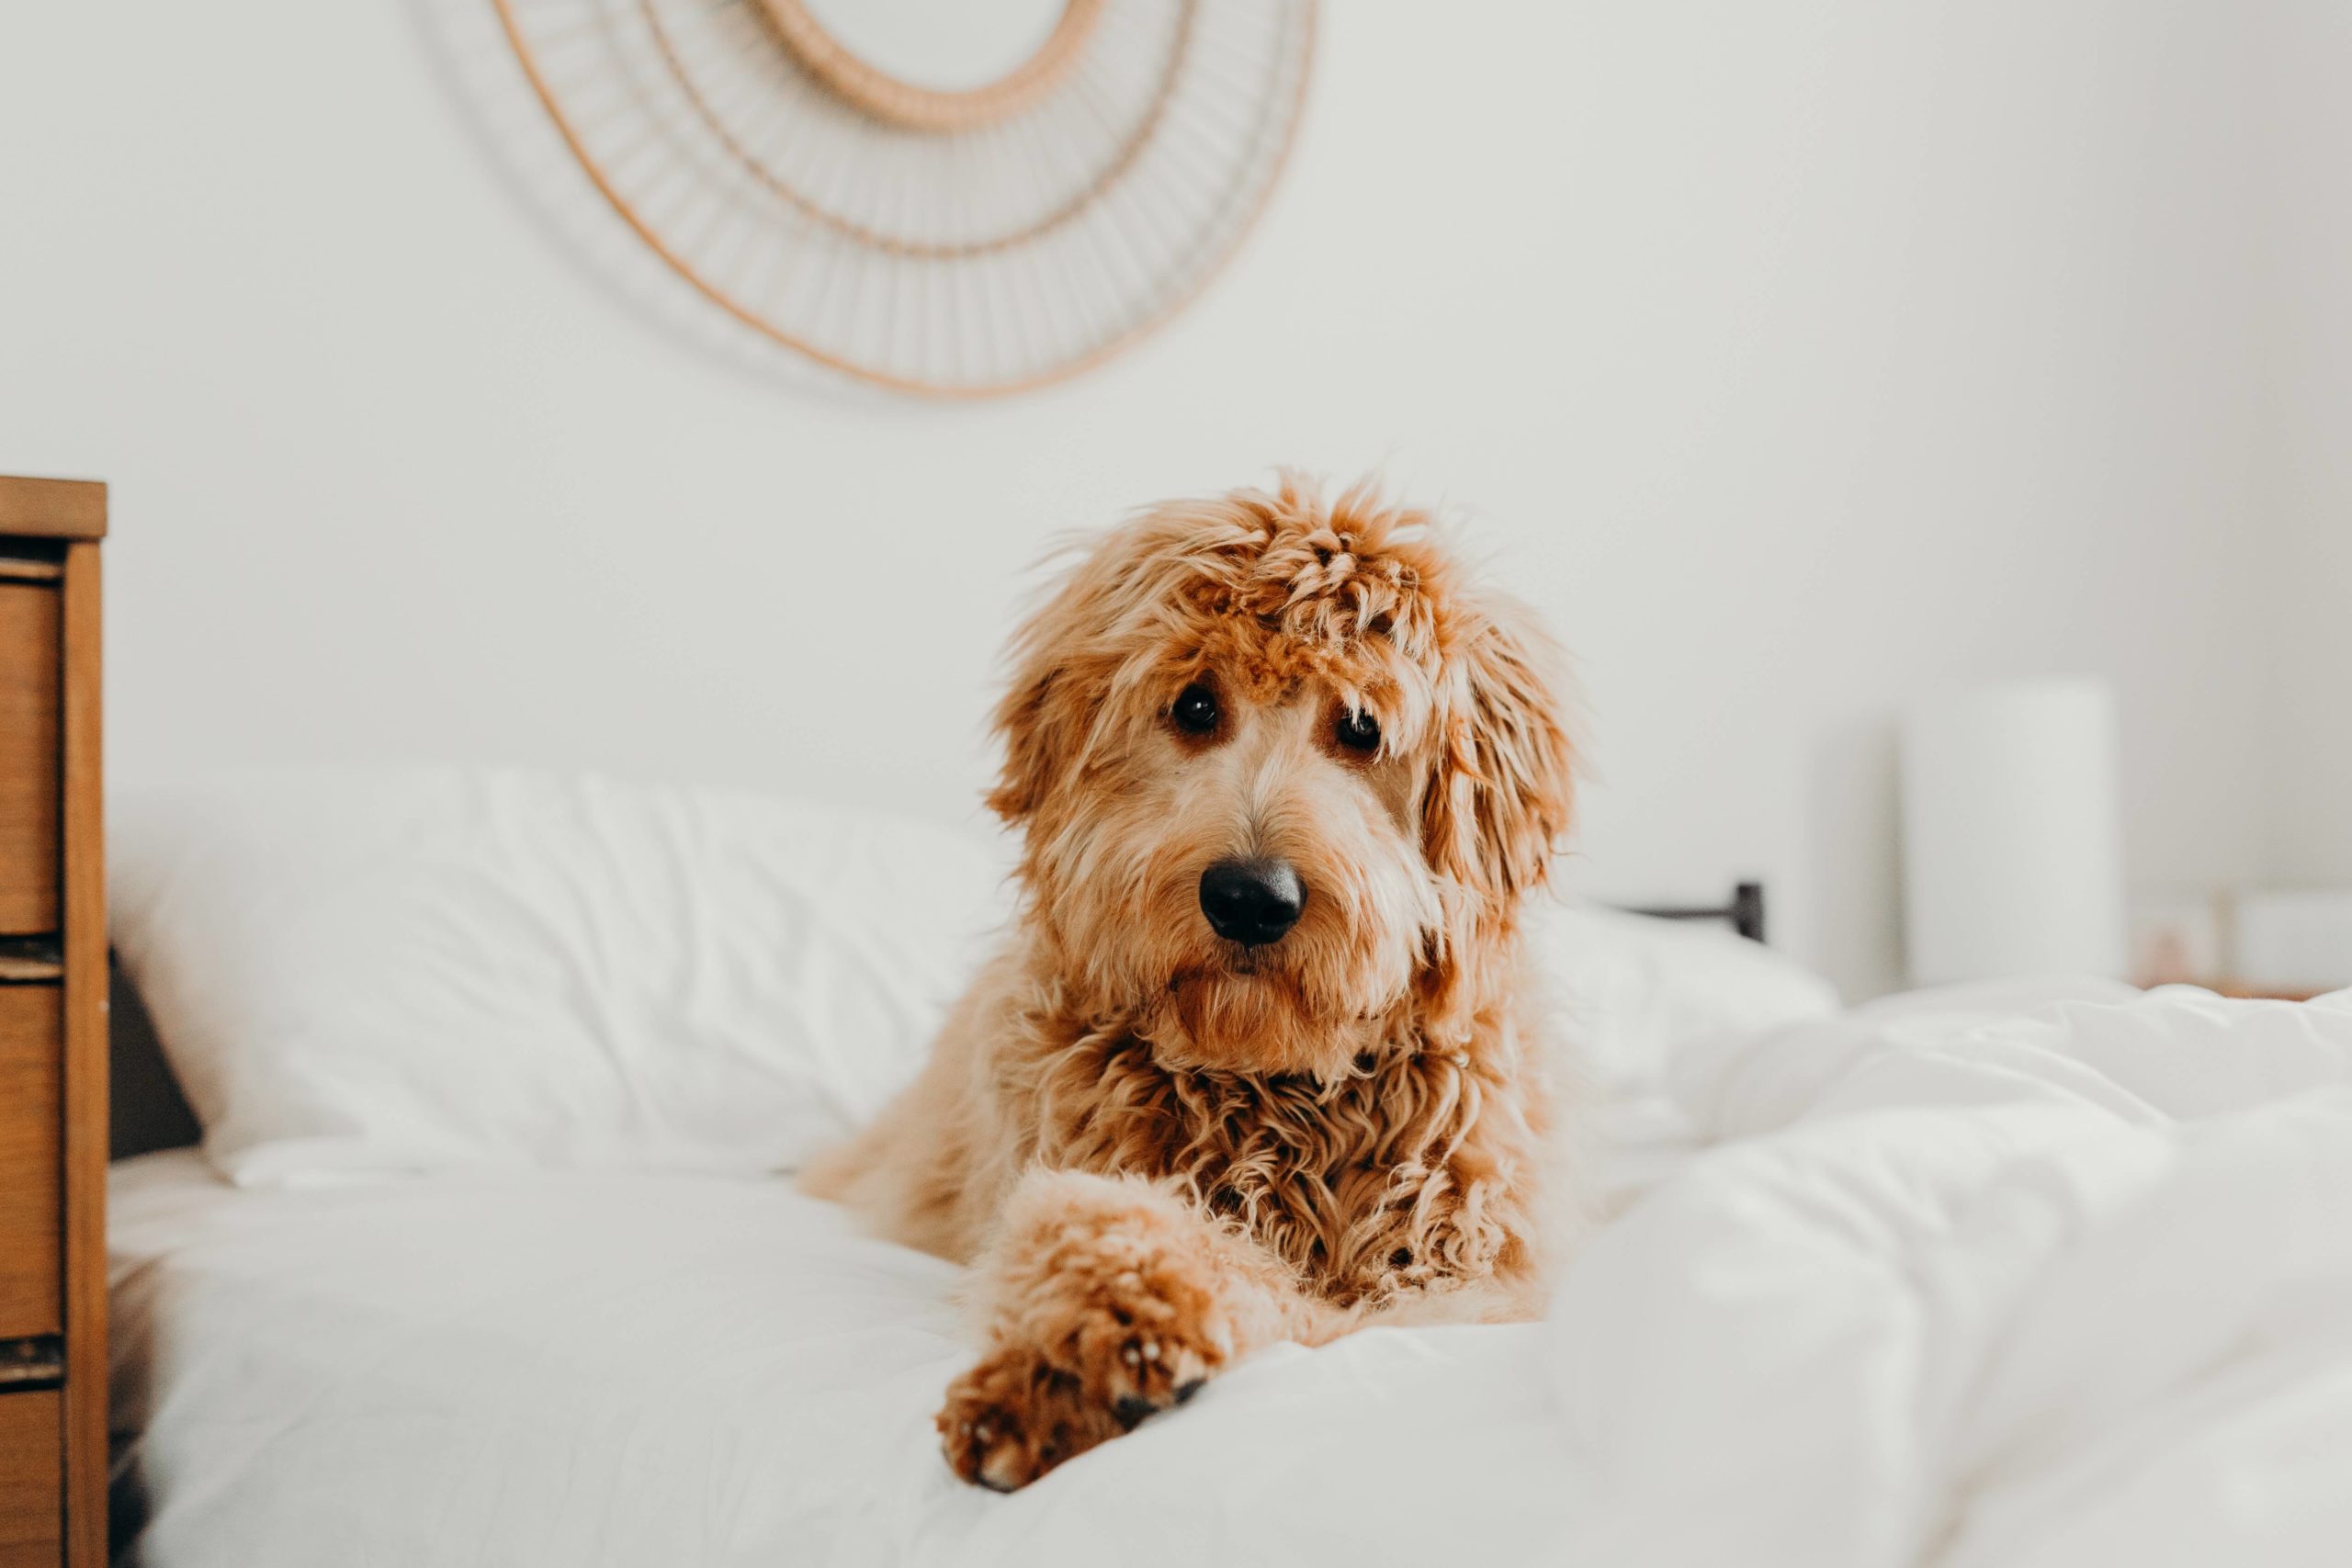 Picture of a Goldendoodle - how big will yours get?